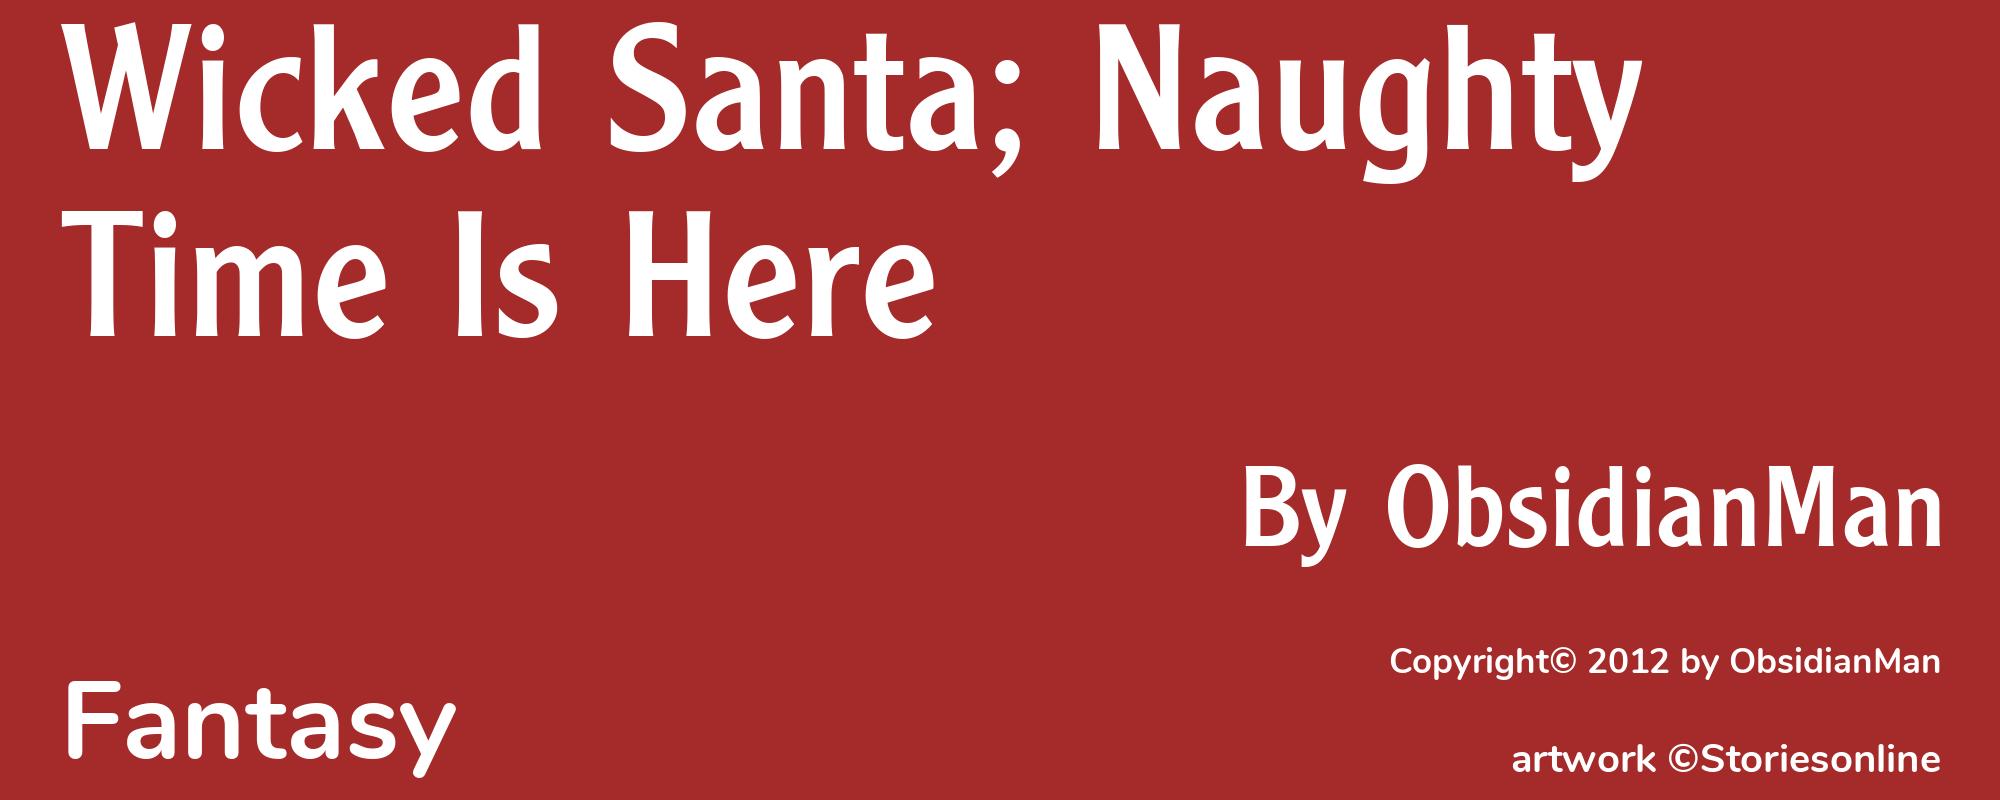 Wicked Santa; Naughty Time Is Here - Cover